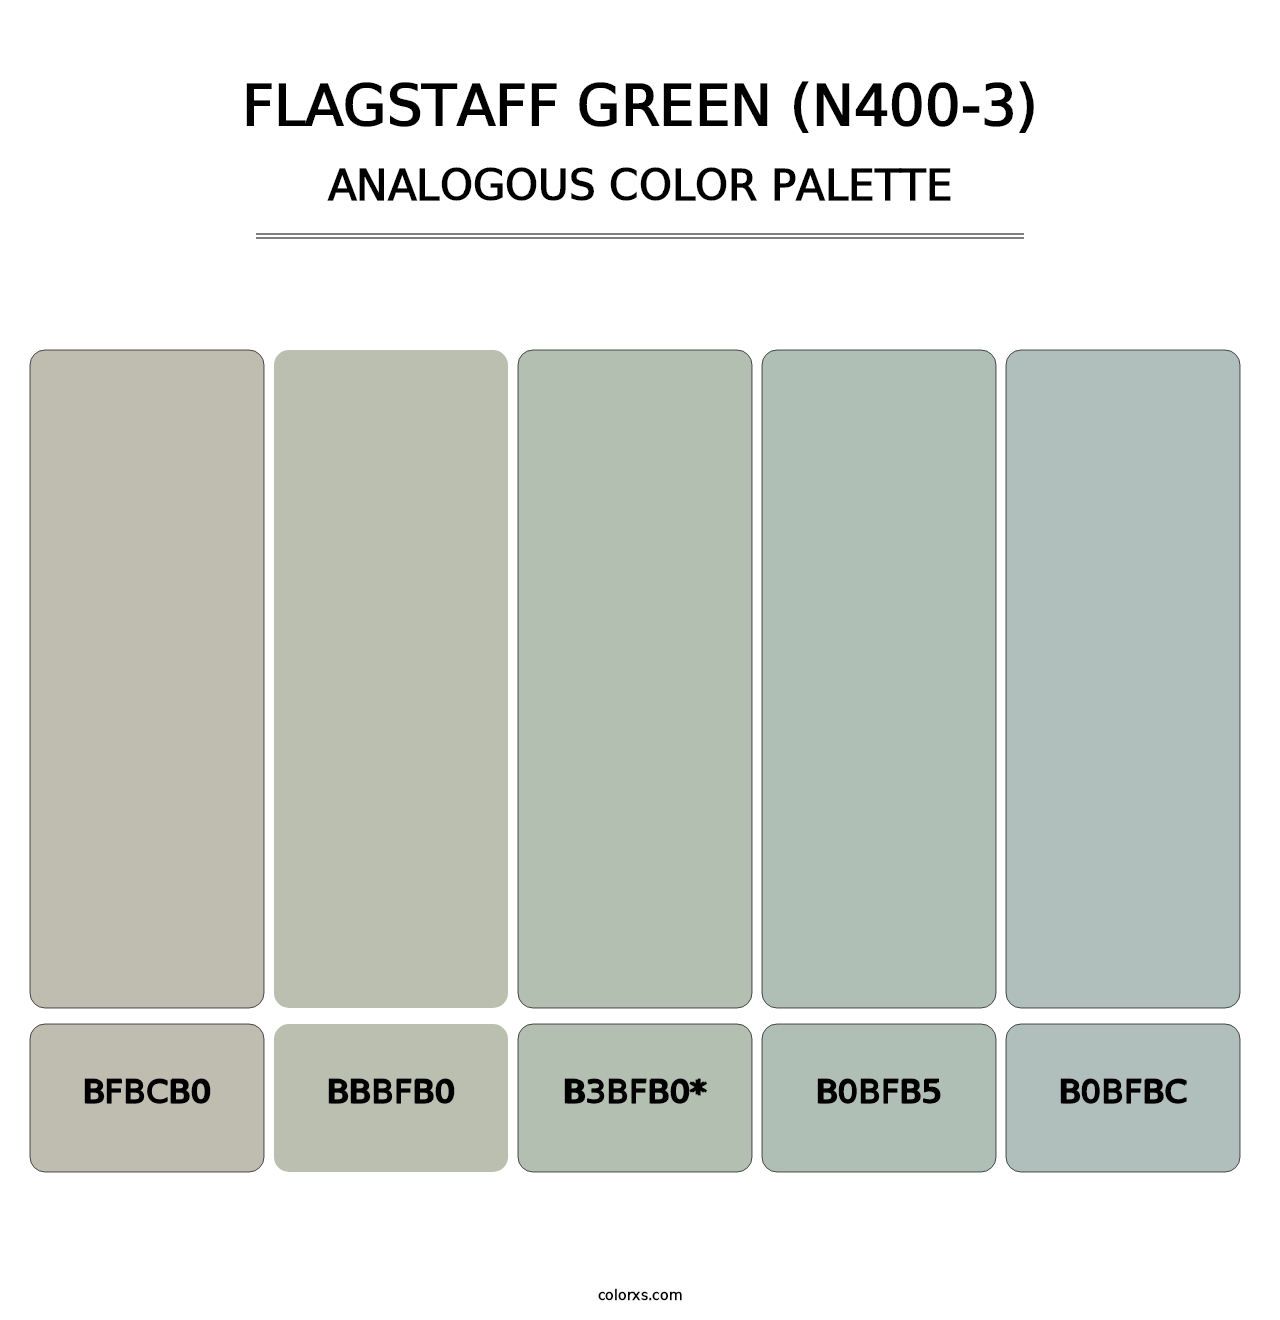 Flagstaff Green (N400-3) - Analogous Color Palette